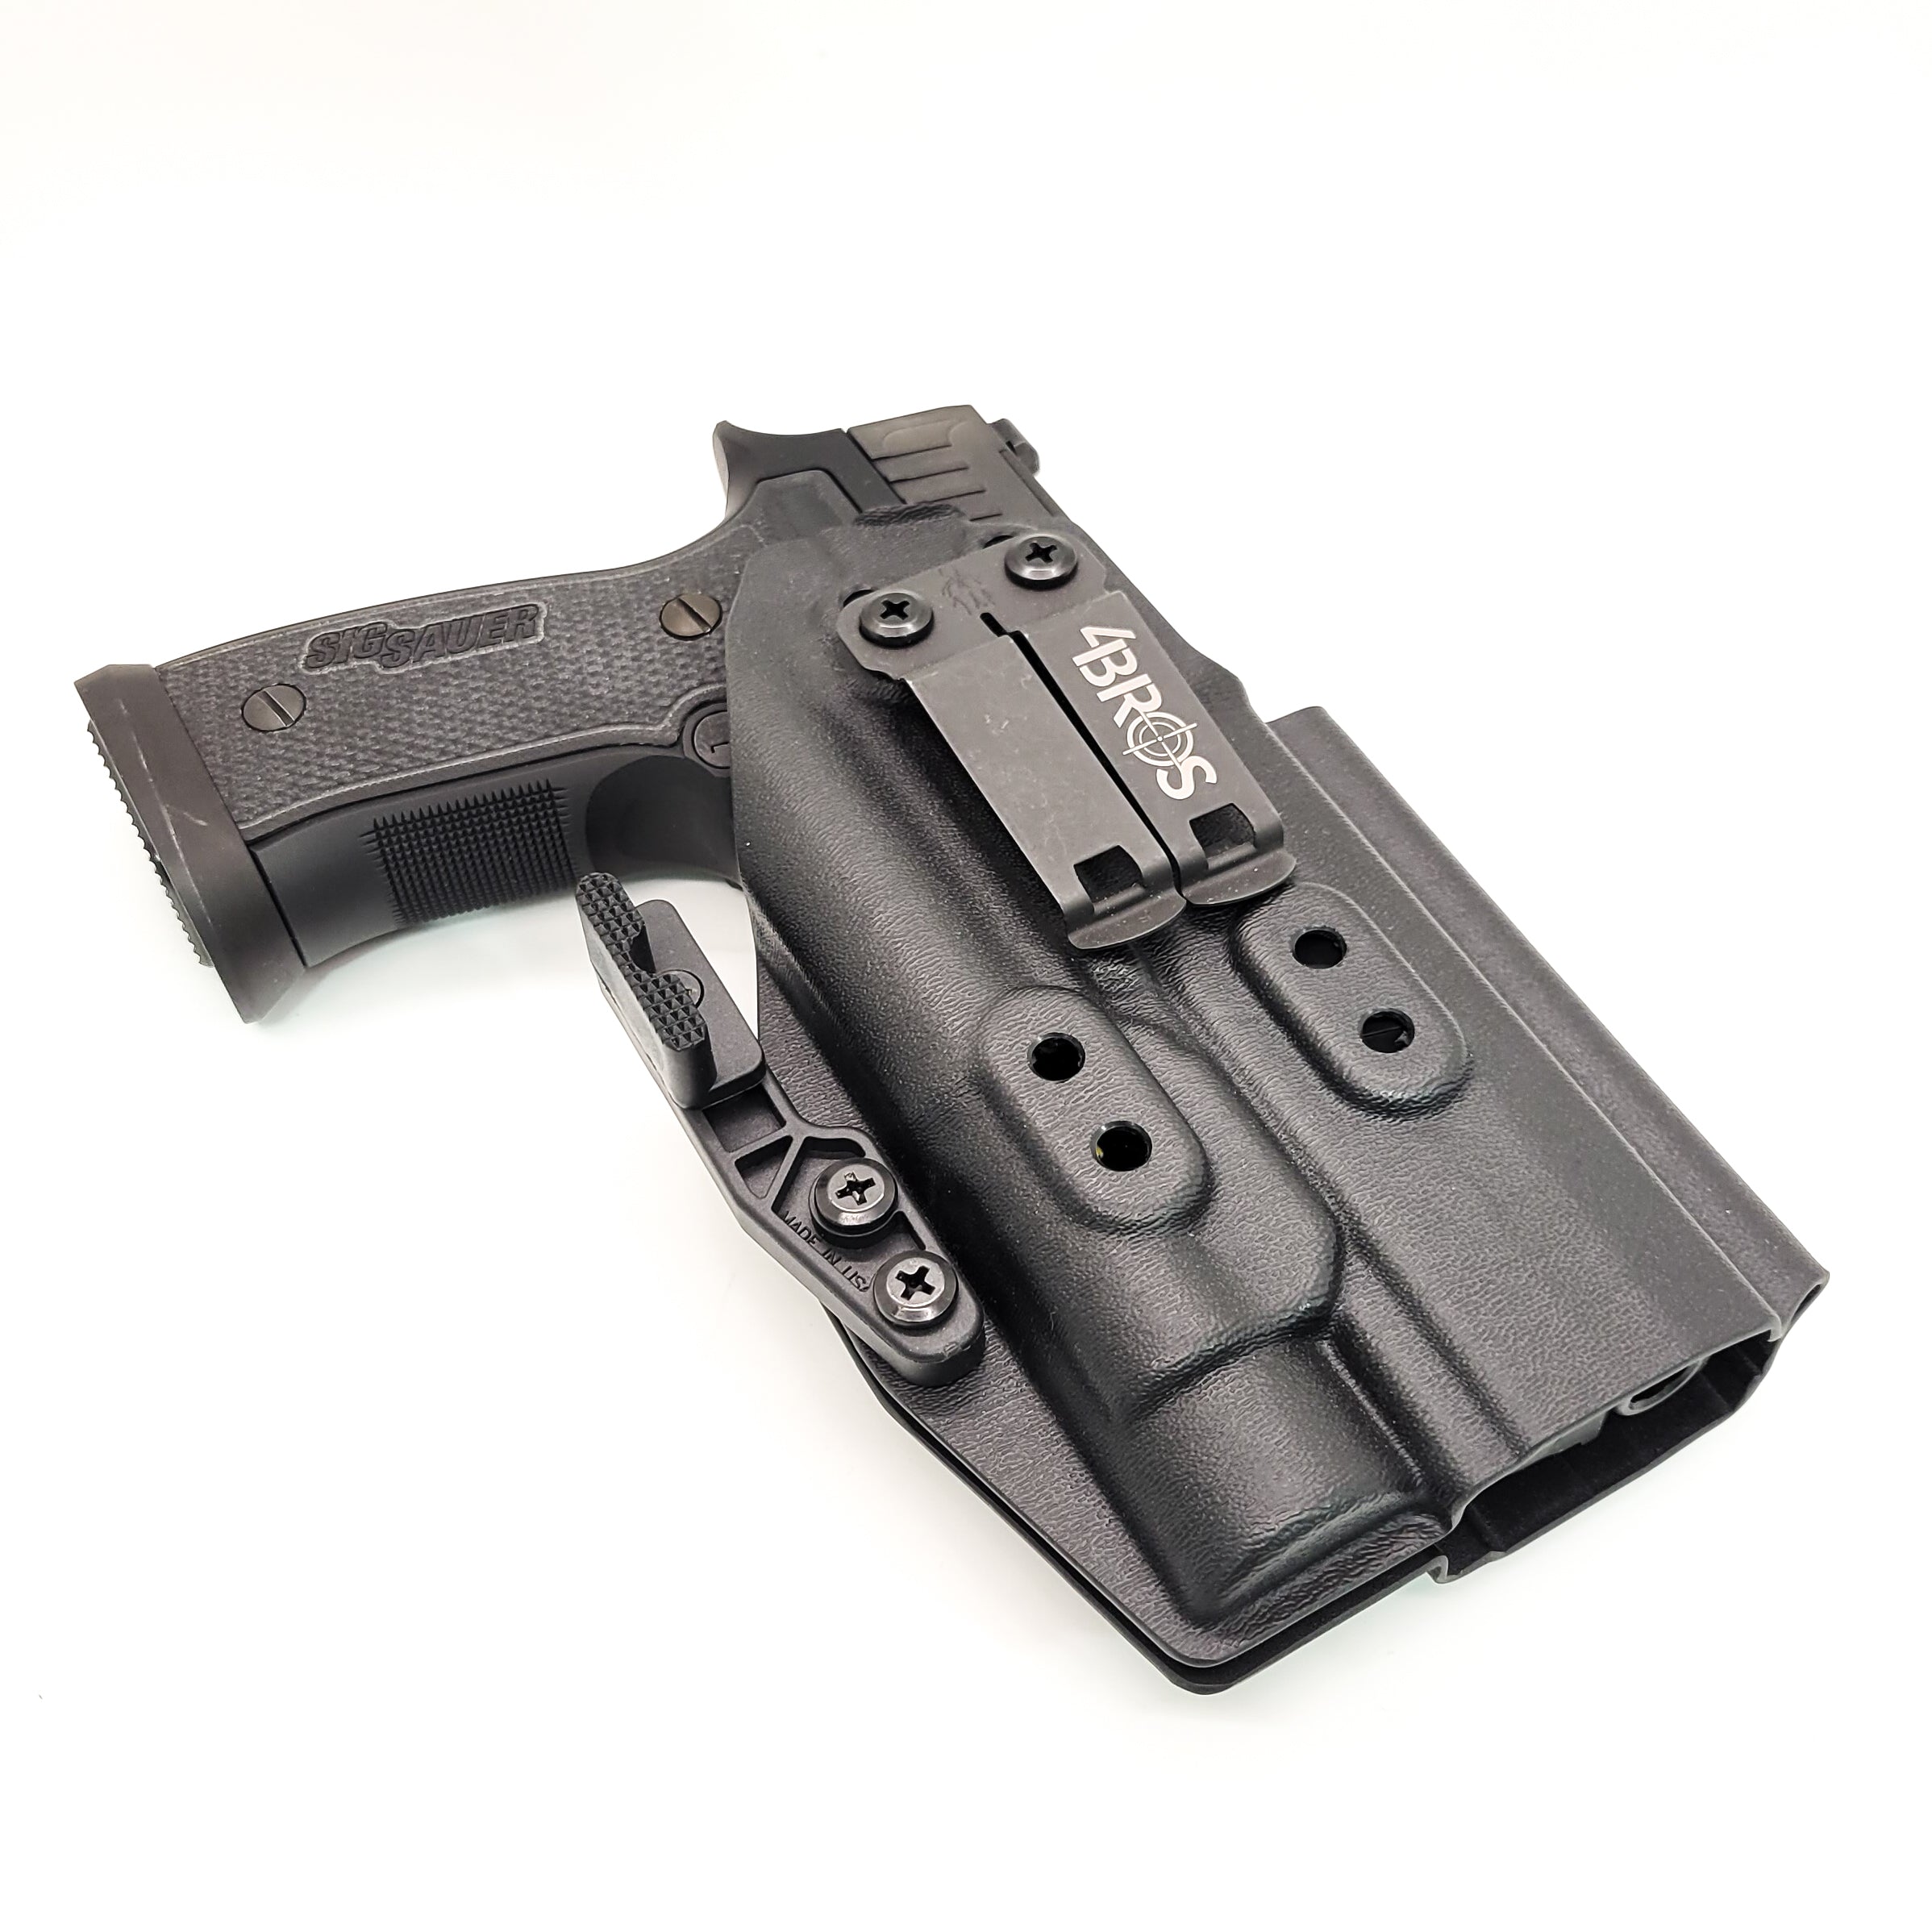 For the best IWB AIWB Inside Waistband Holster designed to fit the Sig Sauer P320 AXG pistols with the Streamlight TLR-1 or TLR-1 HL light, look no further than Four Brothers. This holster will hold the Full Size, Carry, M18, M17, X-Five, and X-Five Legion with a TLR-1 series light. Open Muzzle Adjustable Retention